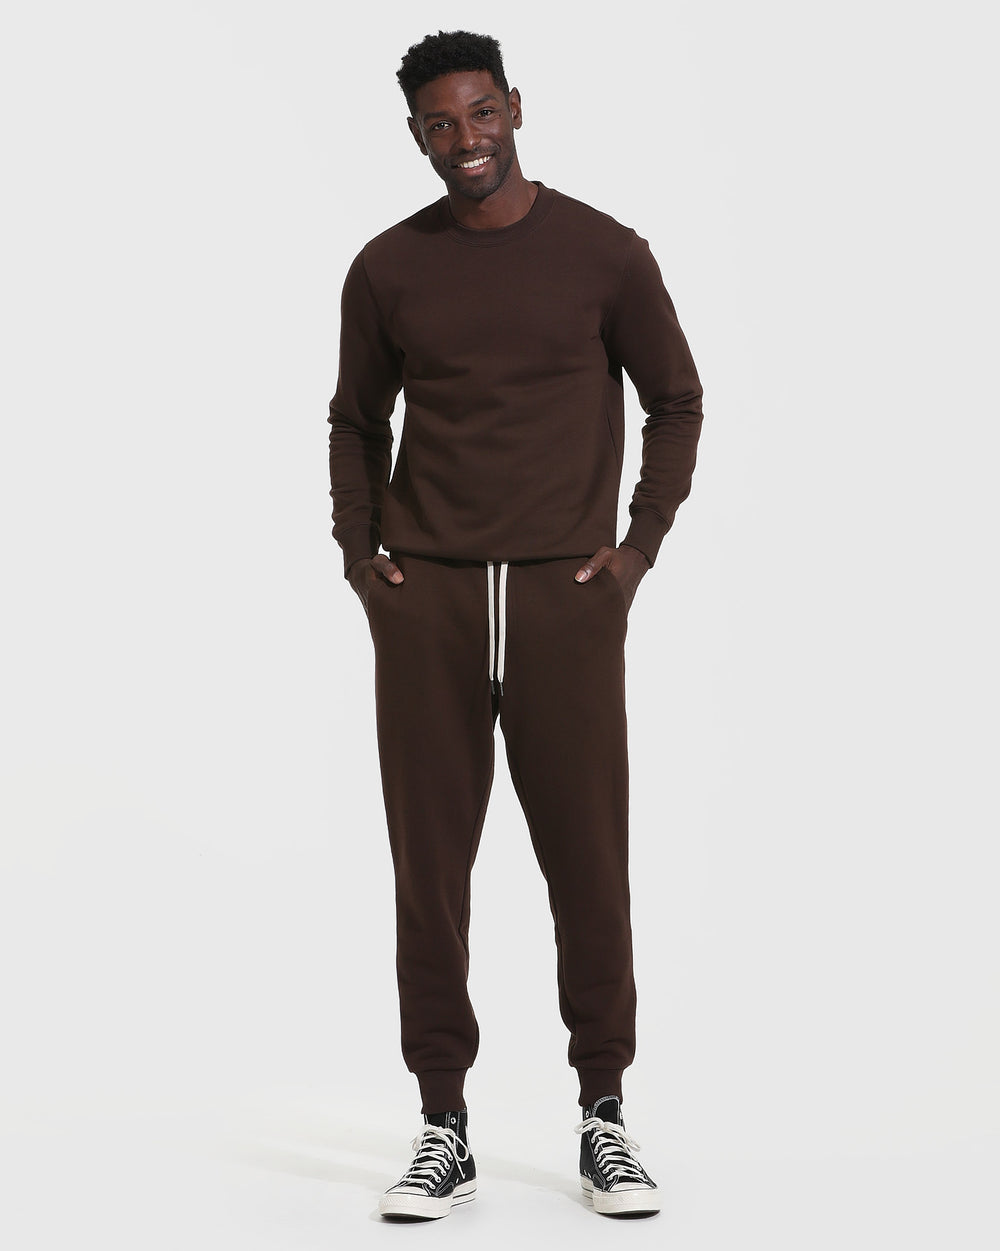 The Year Round Terry Jogger